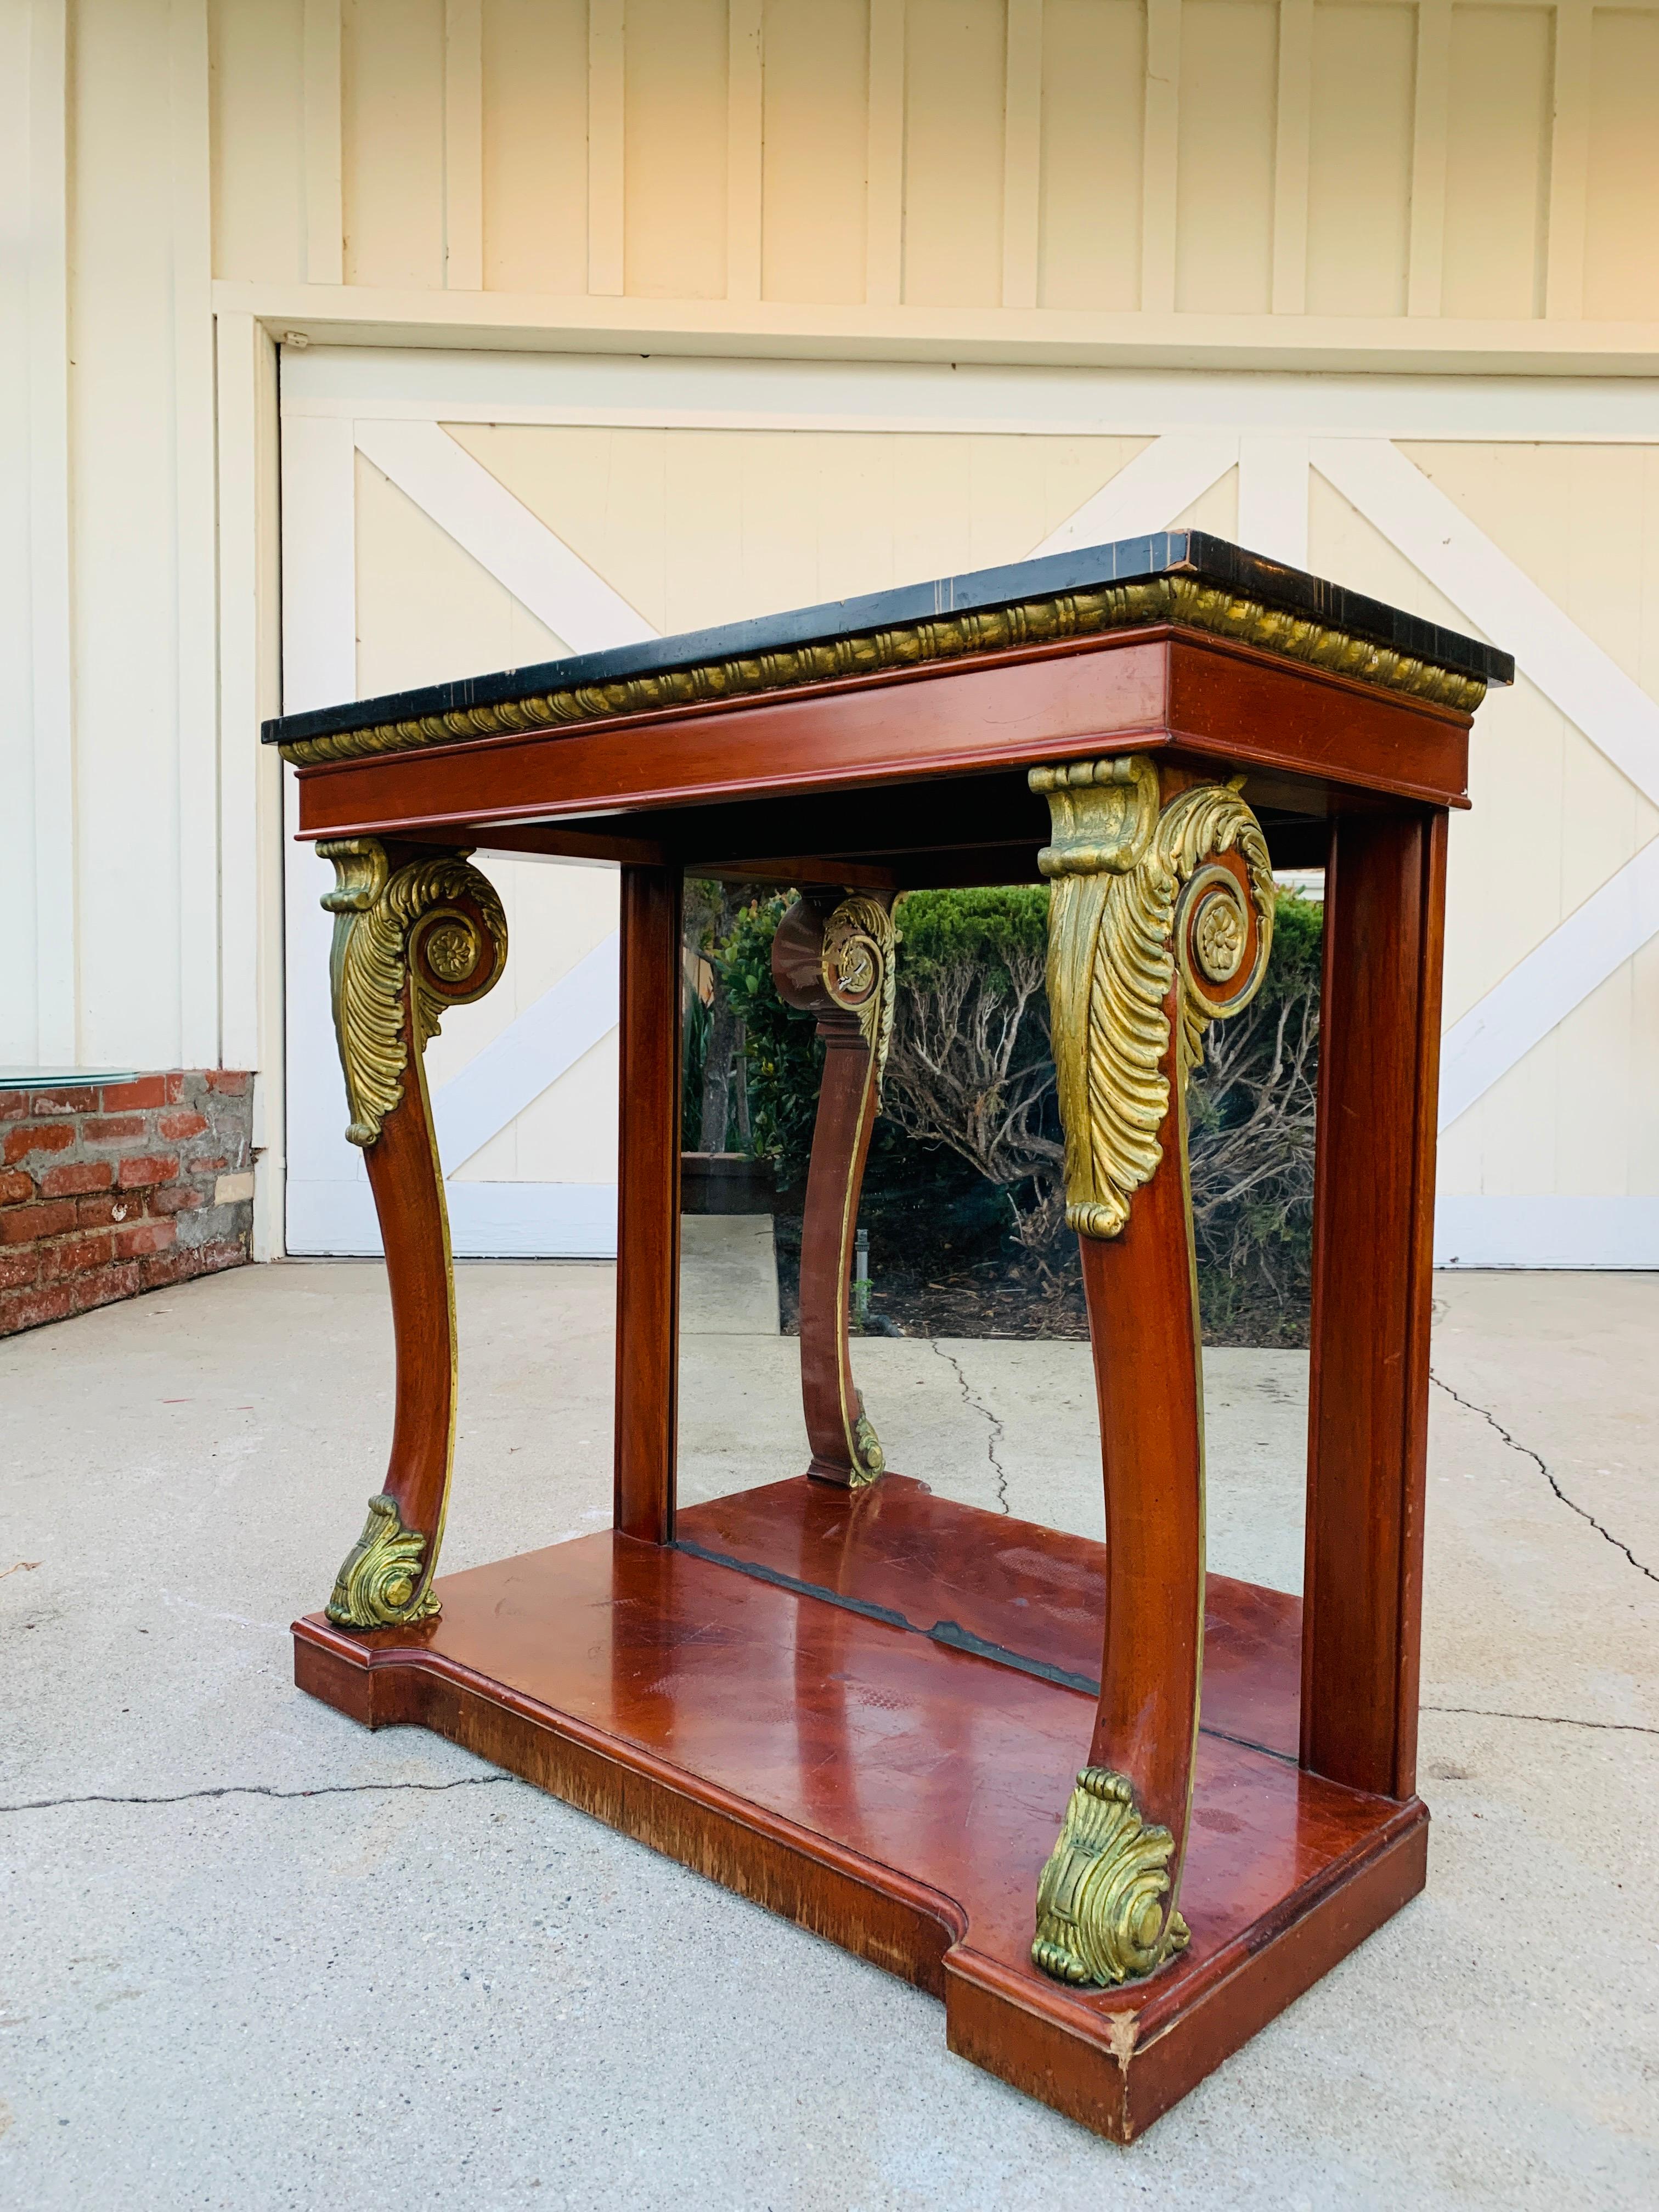 French Empire style console or entry table made in mahogany wood having gold gilt wood carvings.

The table has a faux marble top and am mirrored back. The table was made by Kindel Furniture retaining the original label and finish.

The back of